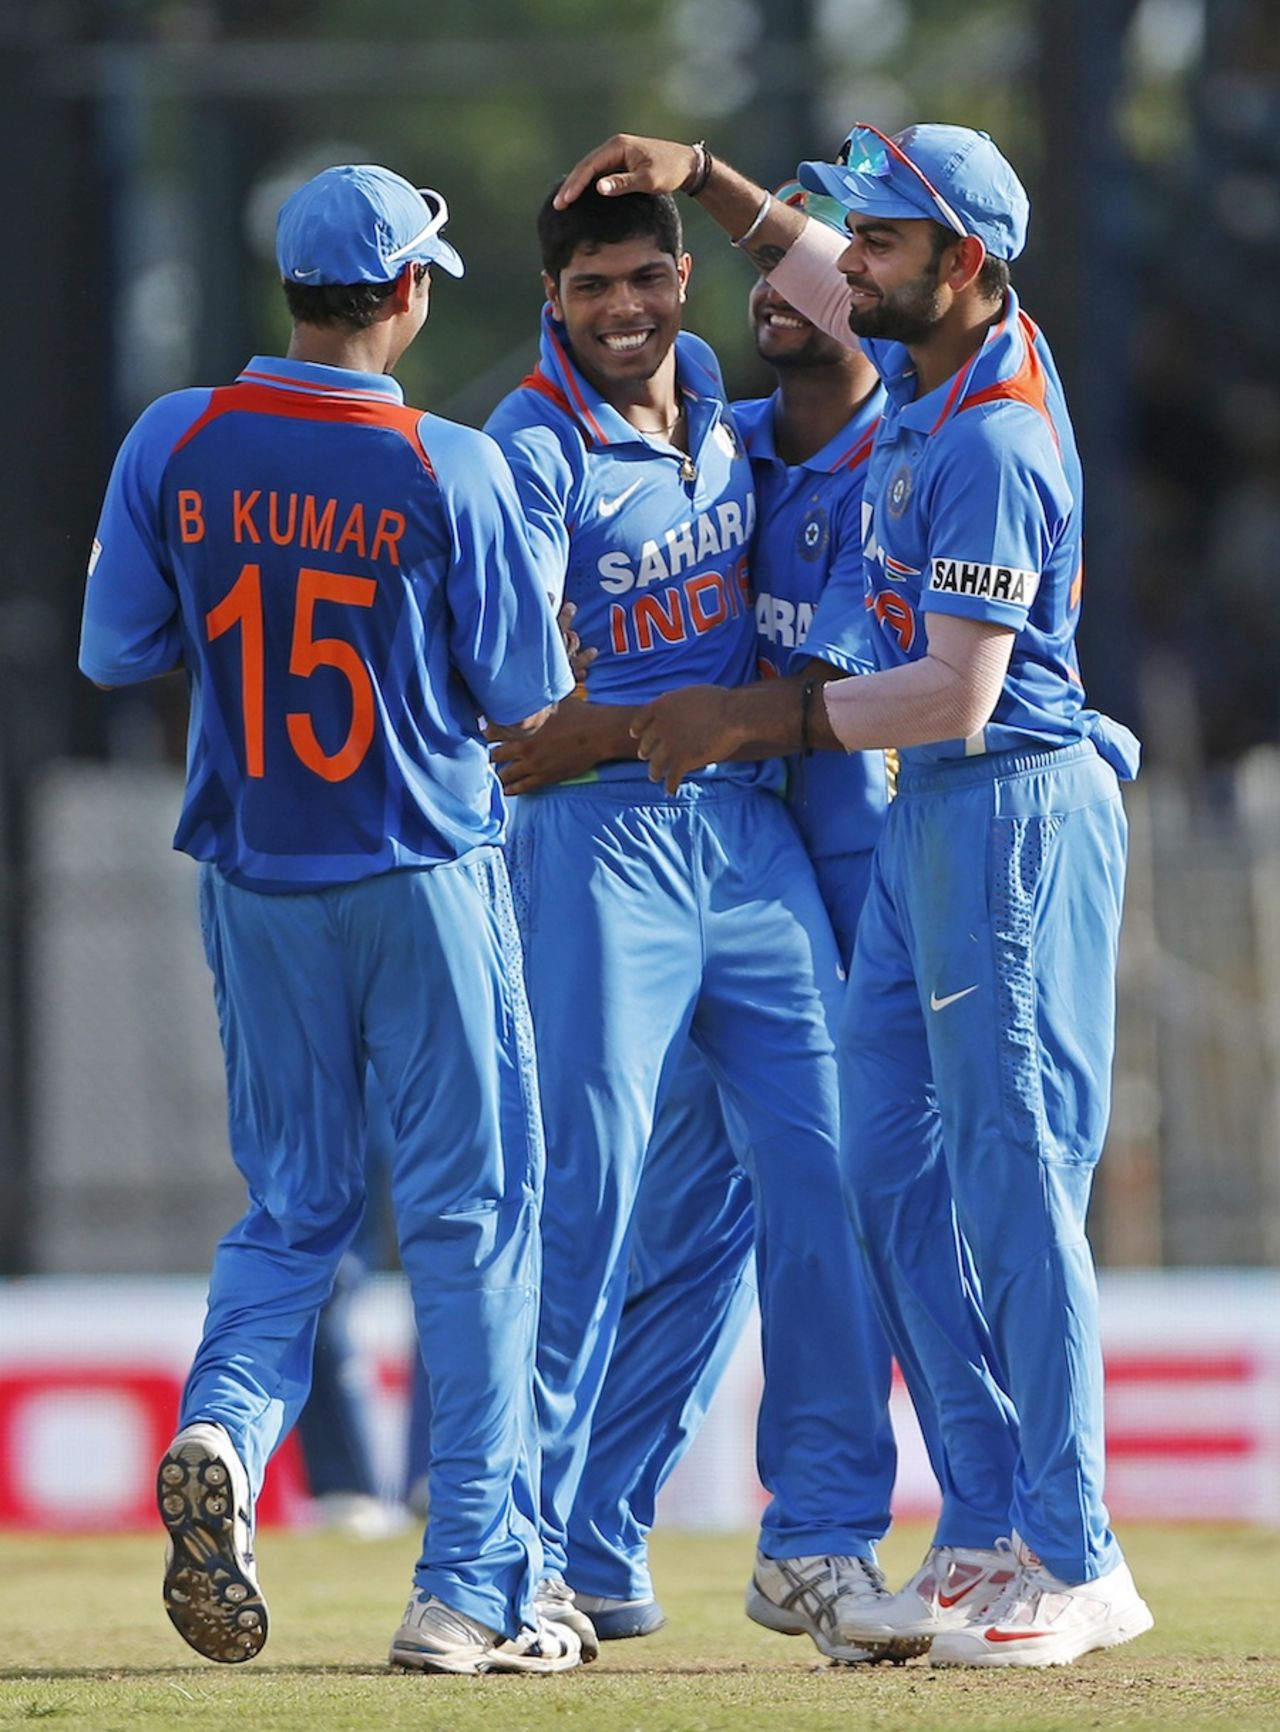 Umesh Yadav is congratulated after a wicket, West Indies v India, West Indies tri-series, Port of Spain, July 5, 2013